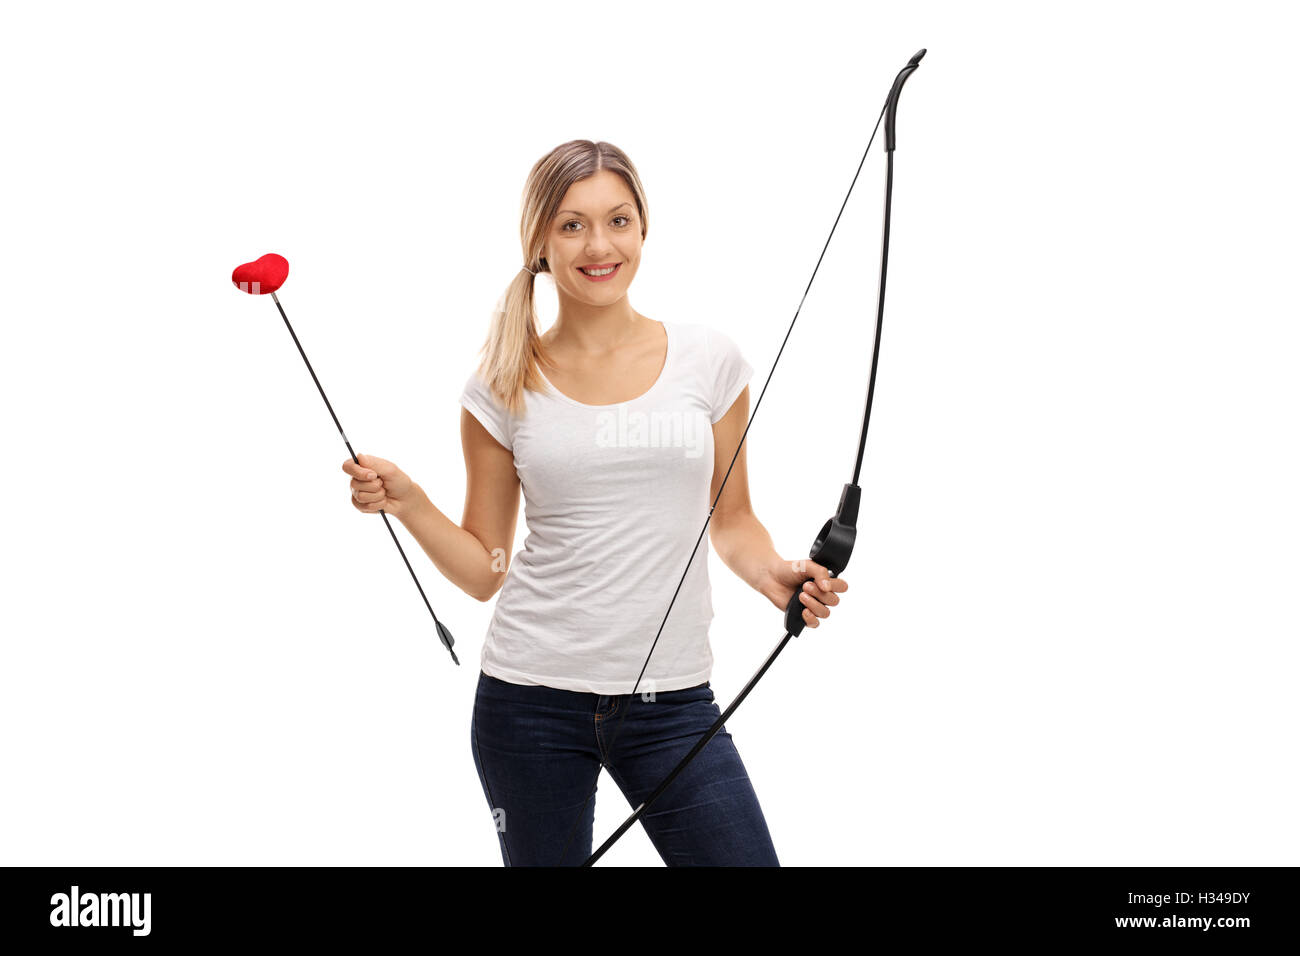 Render Shirtless Male Archer Pose Practicing Archery Studio Red Bow Stock  Photo by ©treetons 668793336